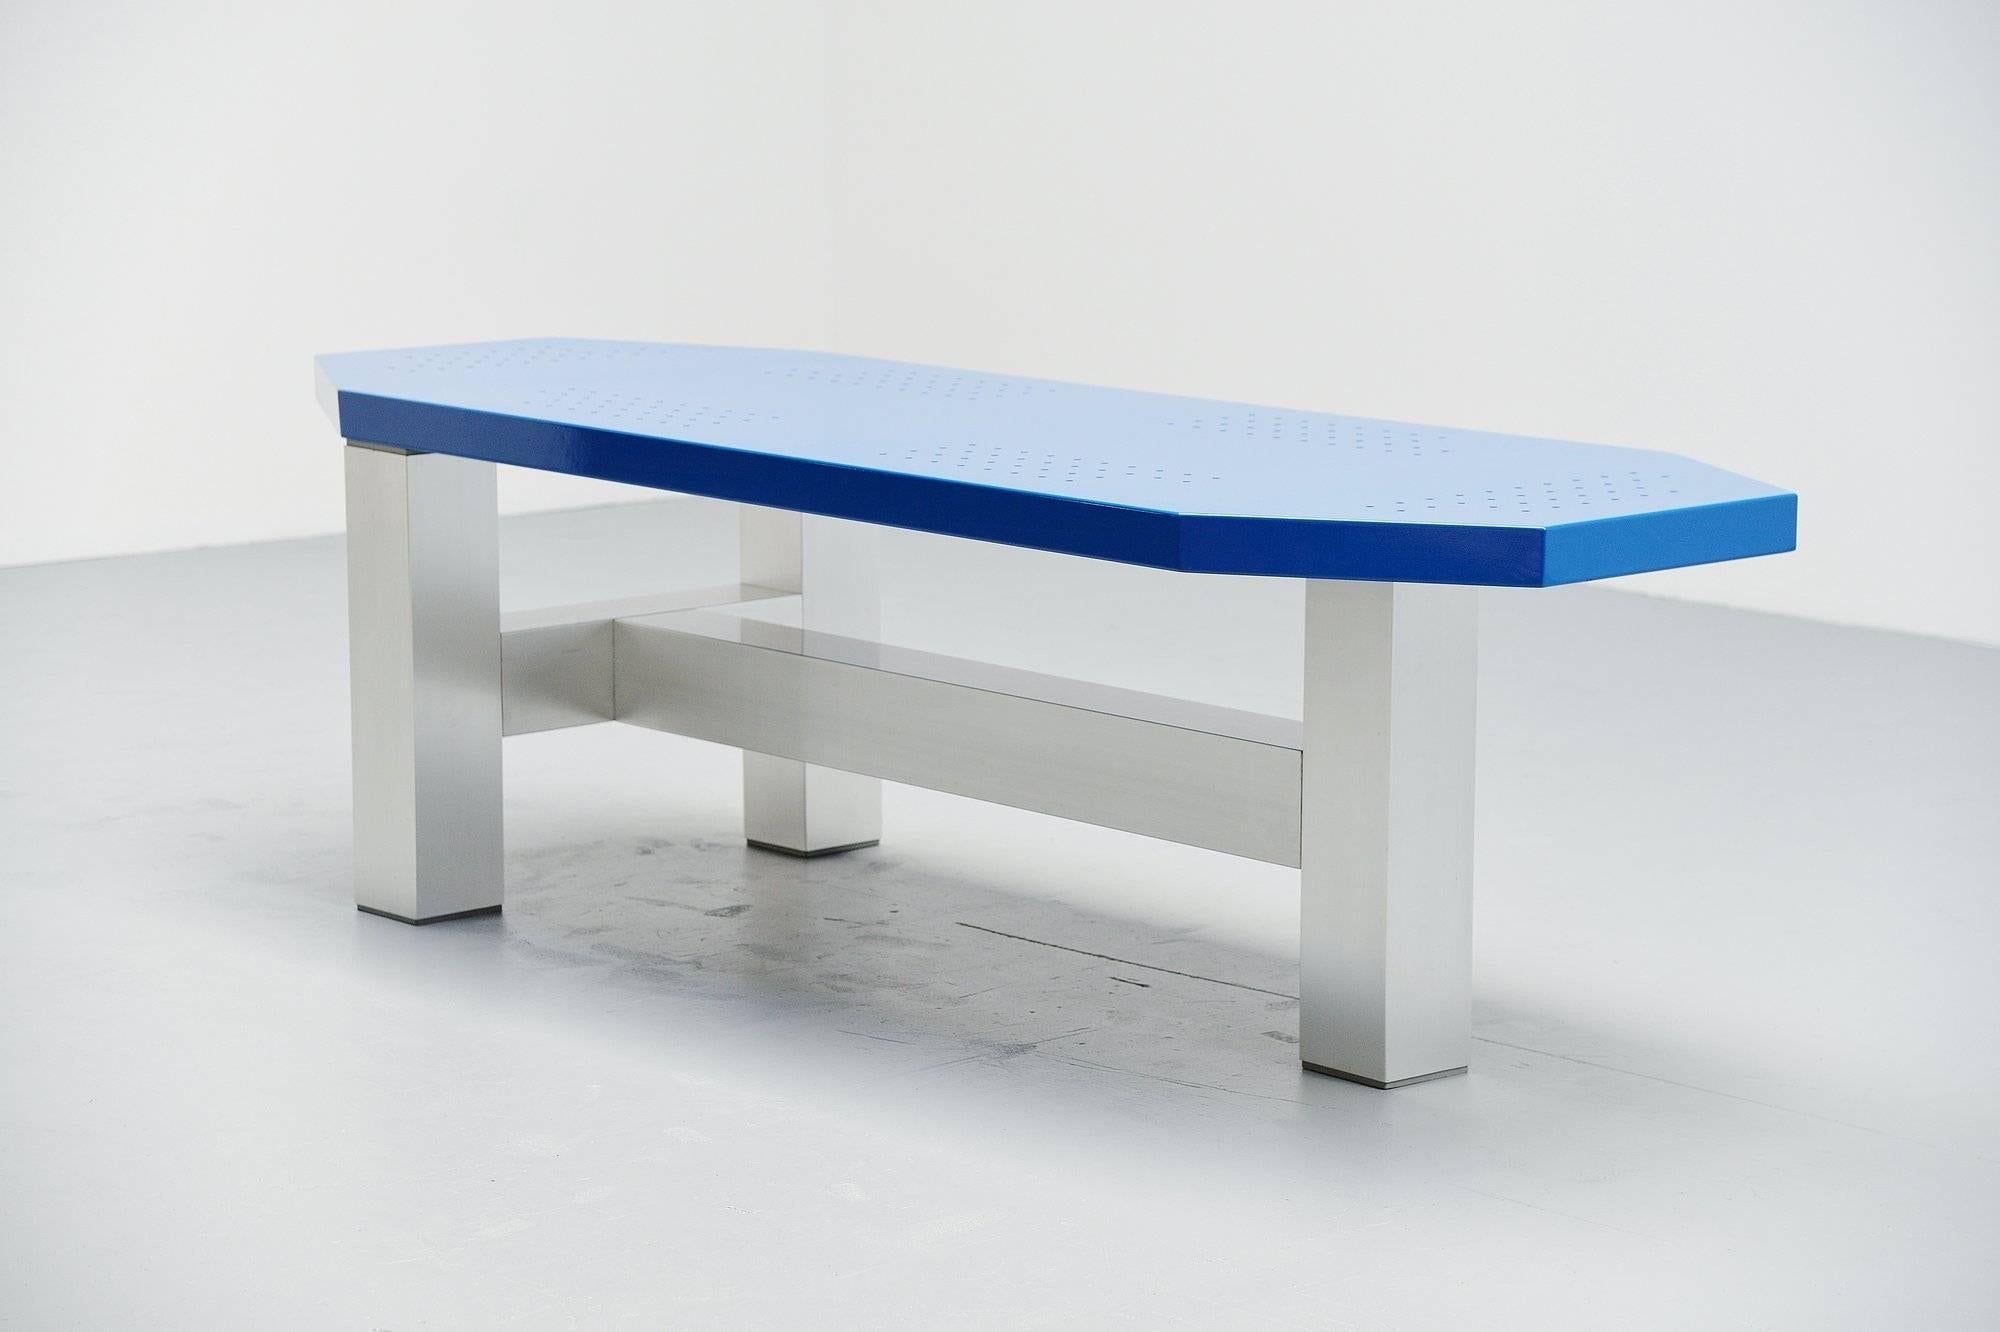 Rare modernist table designed by Martin Visser and Joke van der Heyden, manufactured by ’t Spectrum Bergeyk, 1988. This table is model number TE20 which is the largest size and it has an aluminium base and a blue cold-painted top with die cut dot